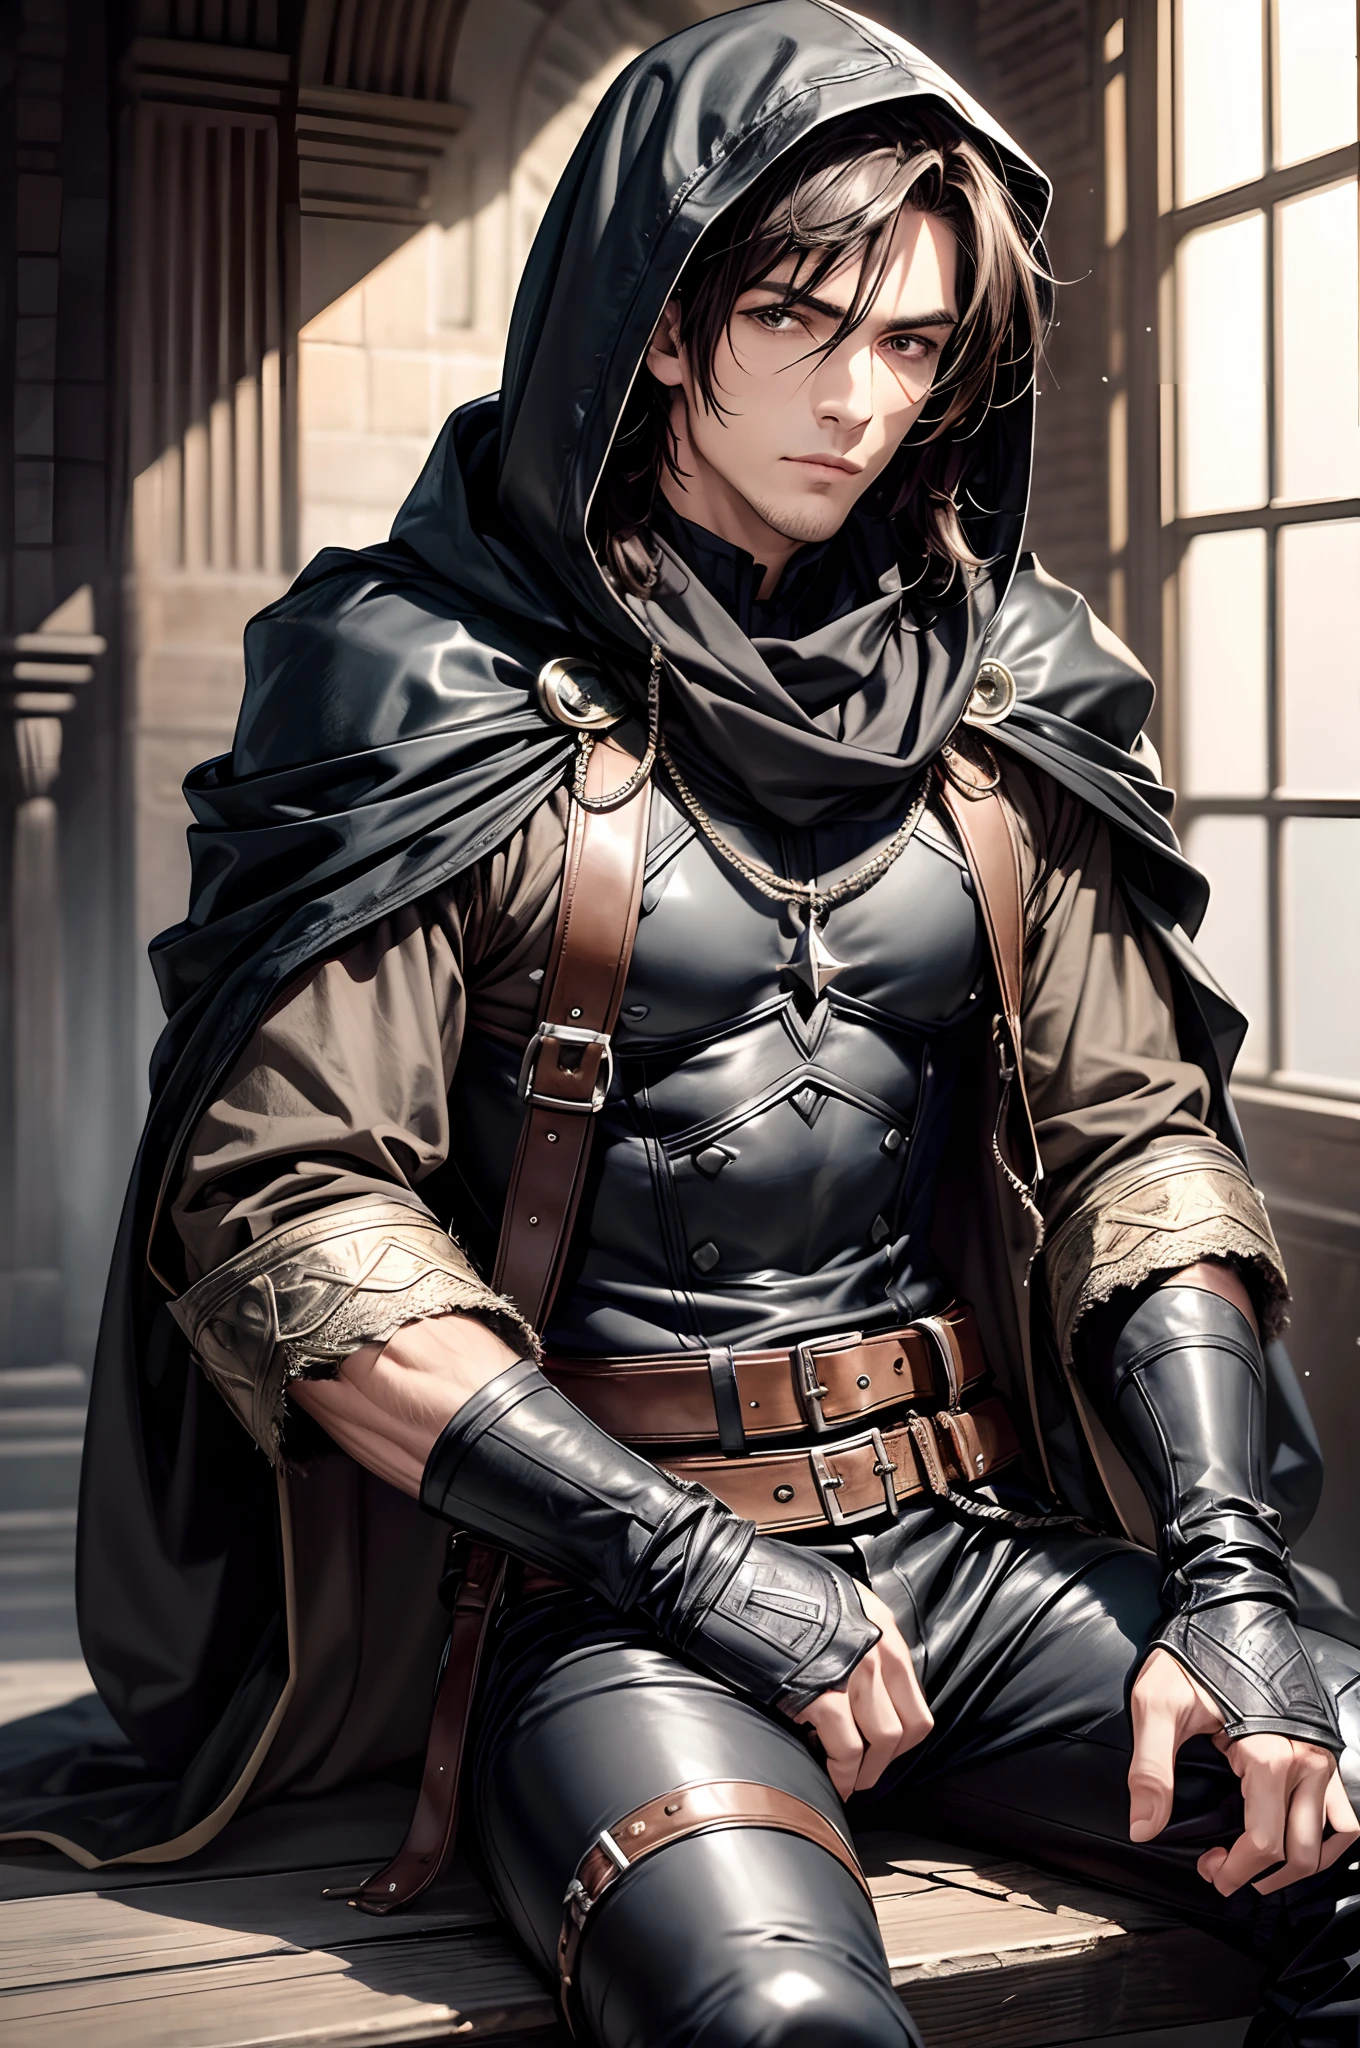 (absurderes, hight resolution, ultra-detailliert), 1 male, Adult, Handsome, High muscular face, broad shoulders, finely detailed eyes, Short black hair, Brown eyes, Black cloak, Wearing a hood, Leather Vest, Leather bag at waist.............., 2 daggers on the belt, castle, Medieval atmosphere, Natural Light and Shadow, Bright particles fly around a person, Fantastic, Mysterious, Bright glow,  Seated Pose, Serious expression, Cold, thoughtful, Mouth Shut